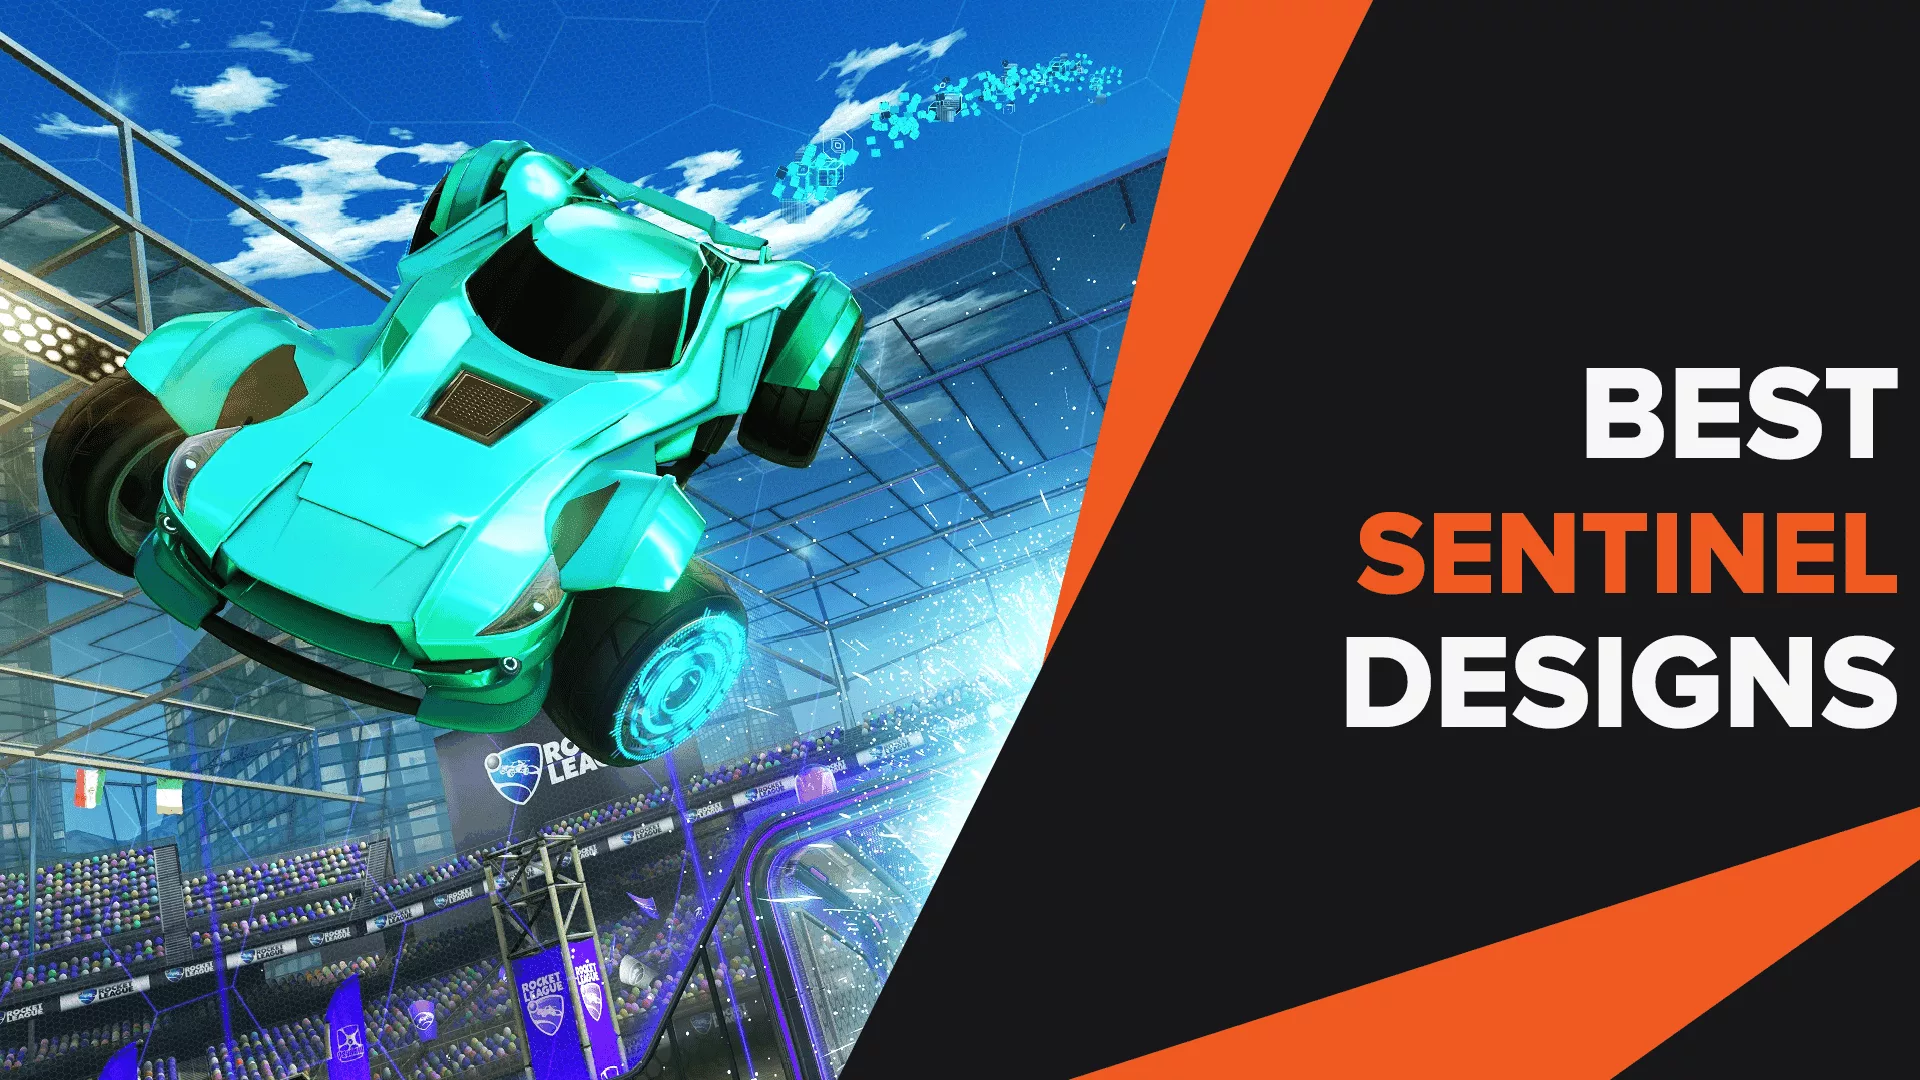 Best Sentinel Designs That Will Make Everyone Envious in Rocket League